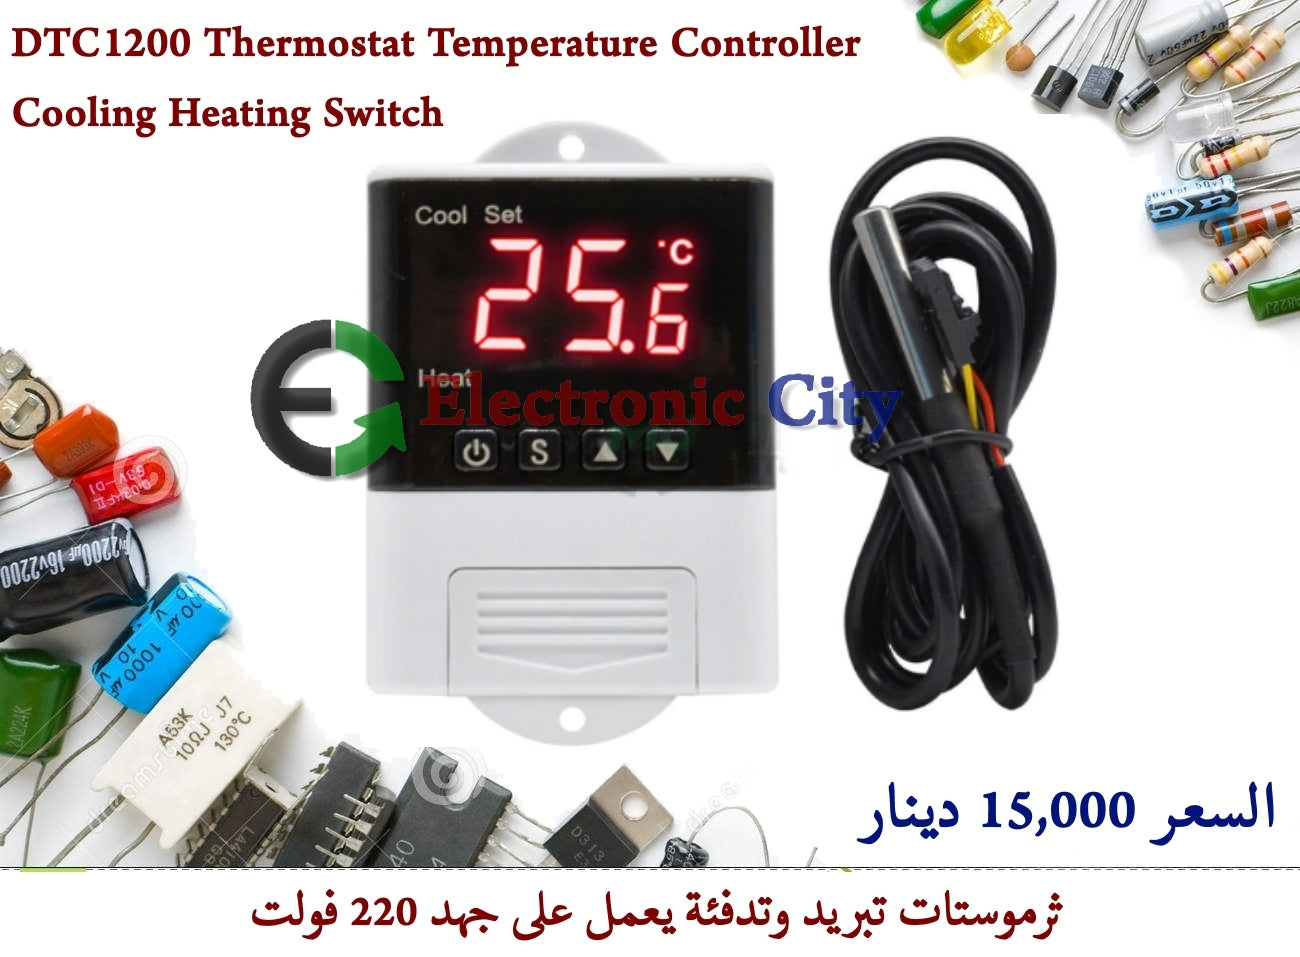 DTC1200 Thermostat Temperature Controller Cooling Heating Switch  XA0008